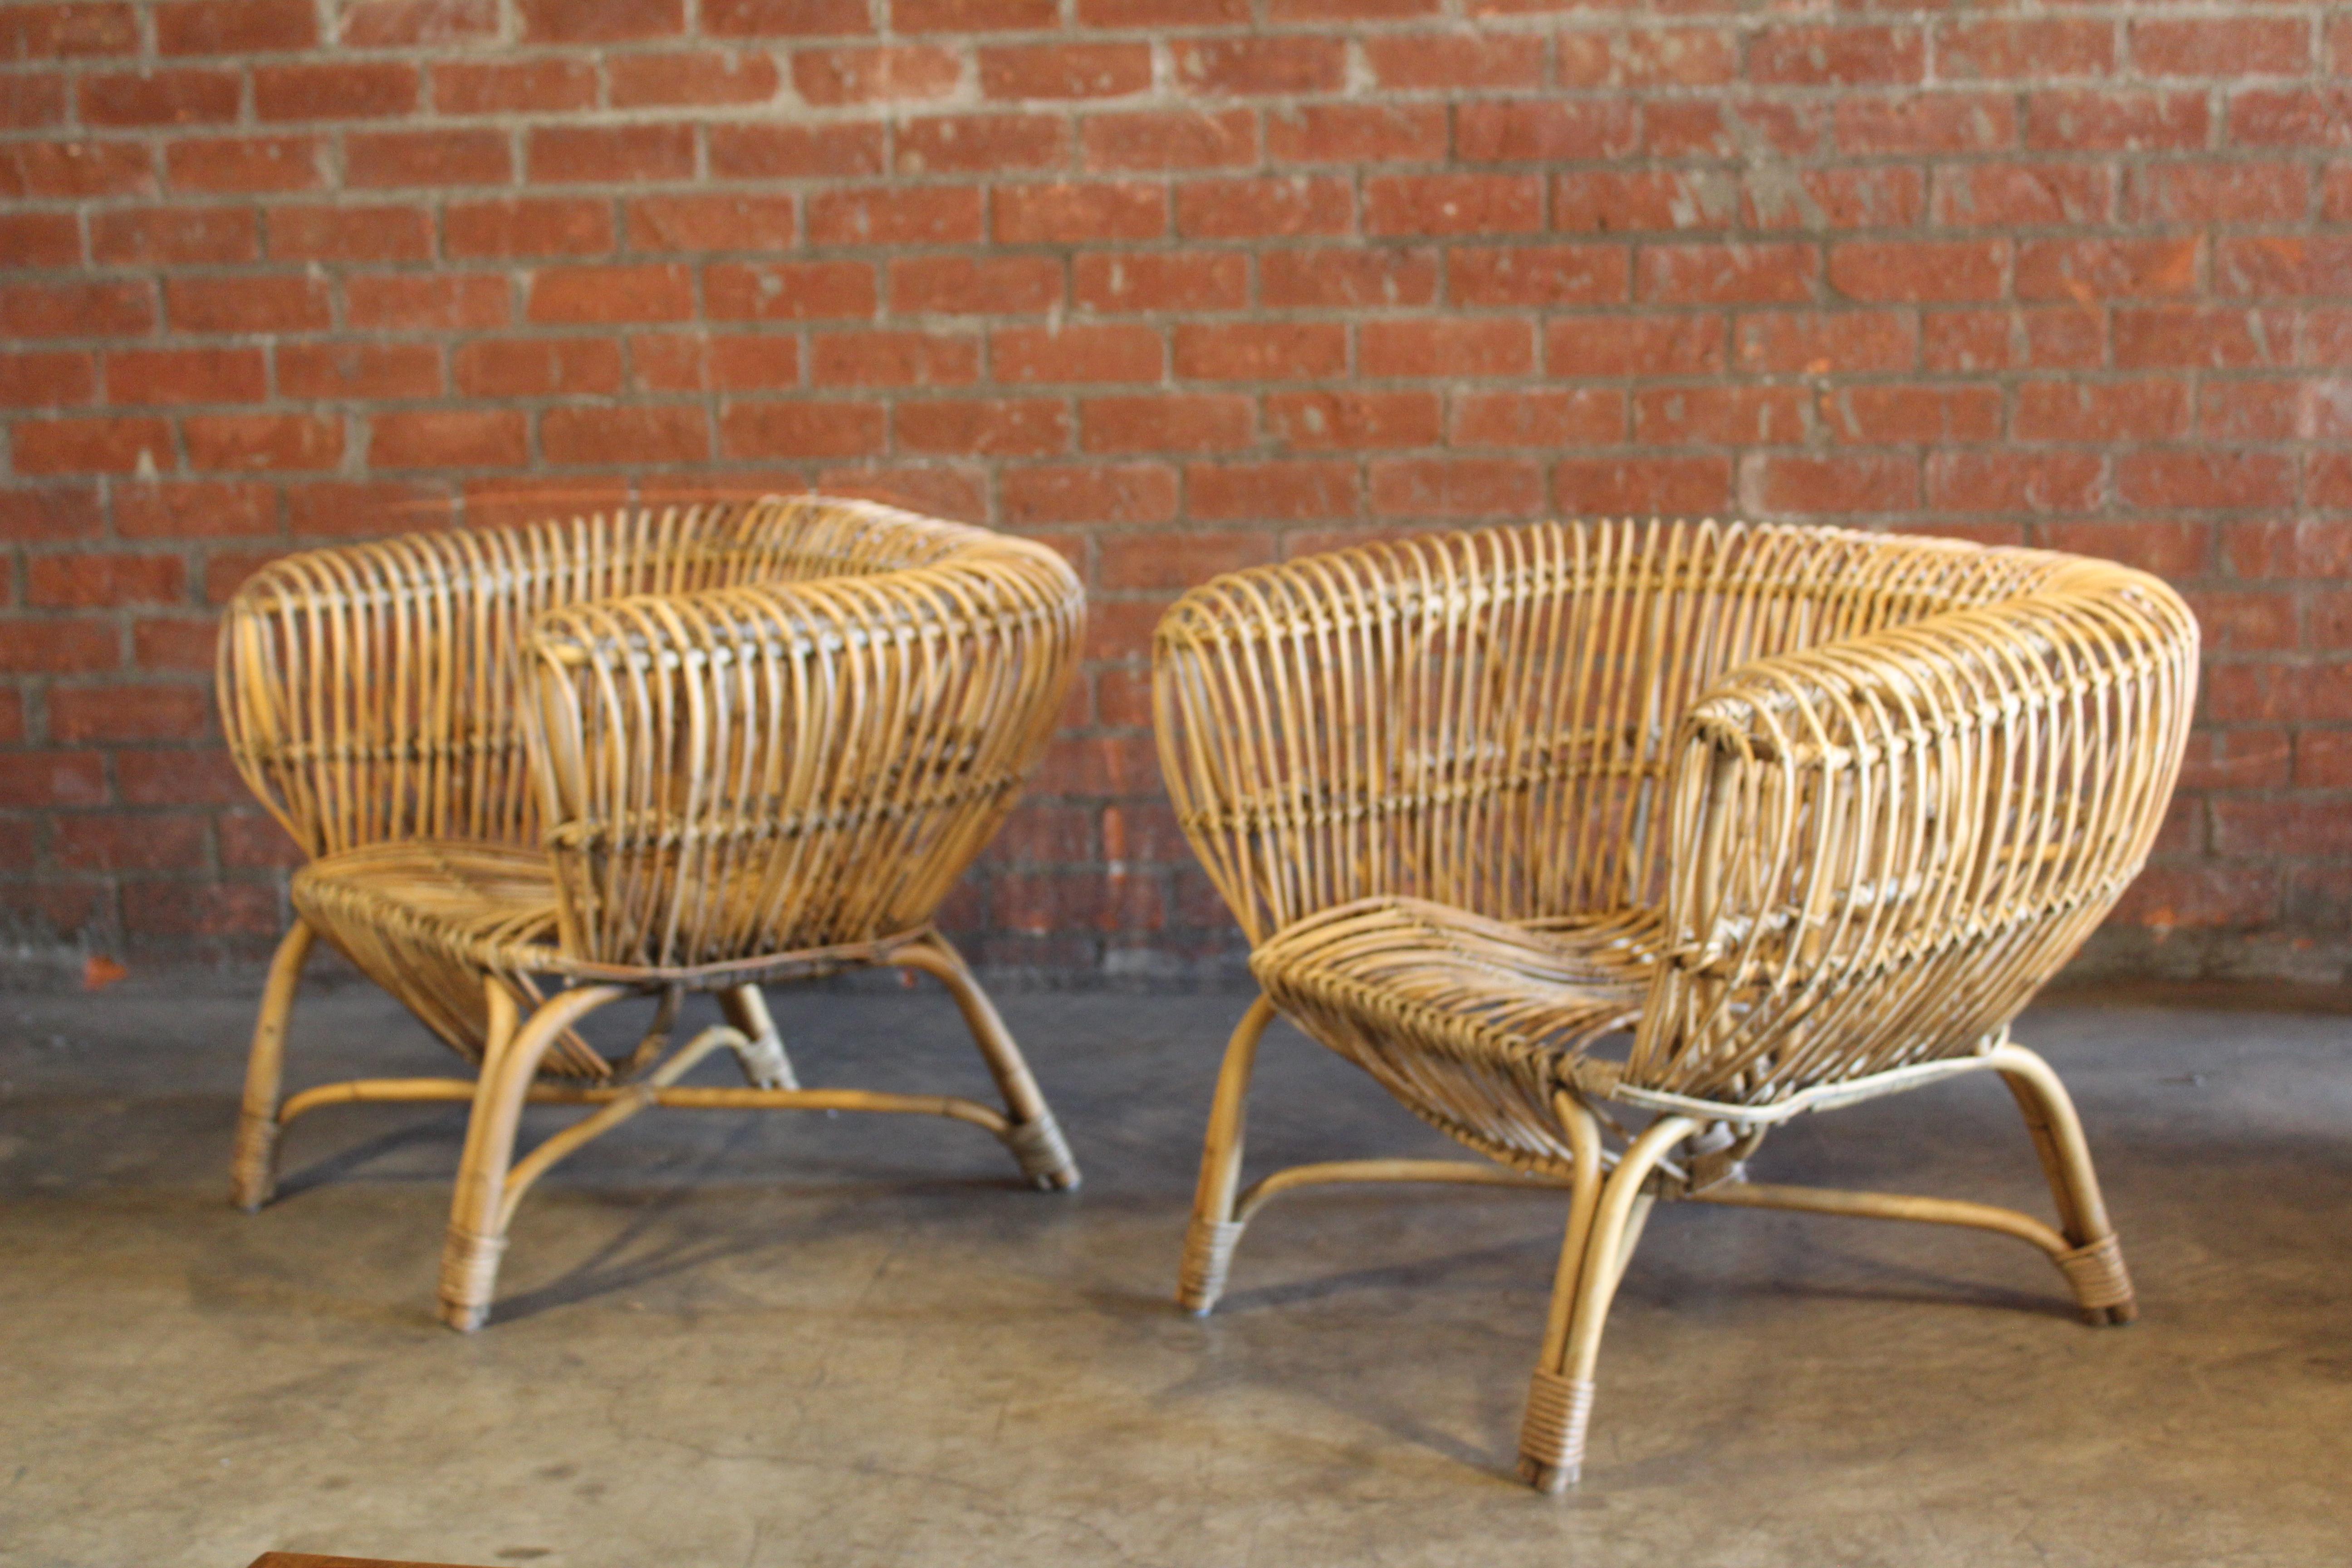 Mid-20th Century Pair of 1960s Italian Bamboo Chairs Attributed to Franco Albini